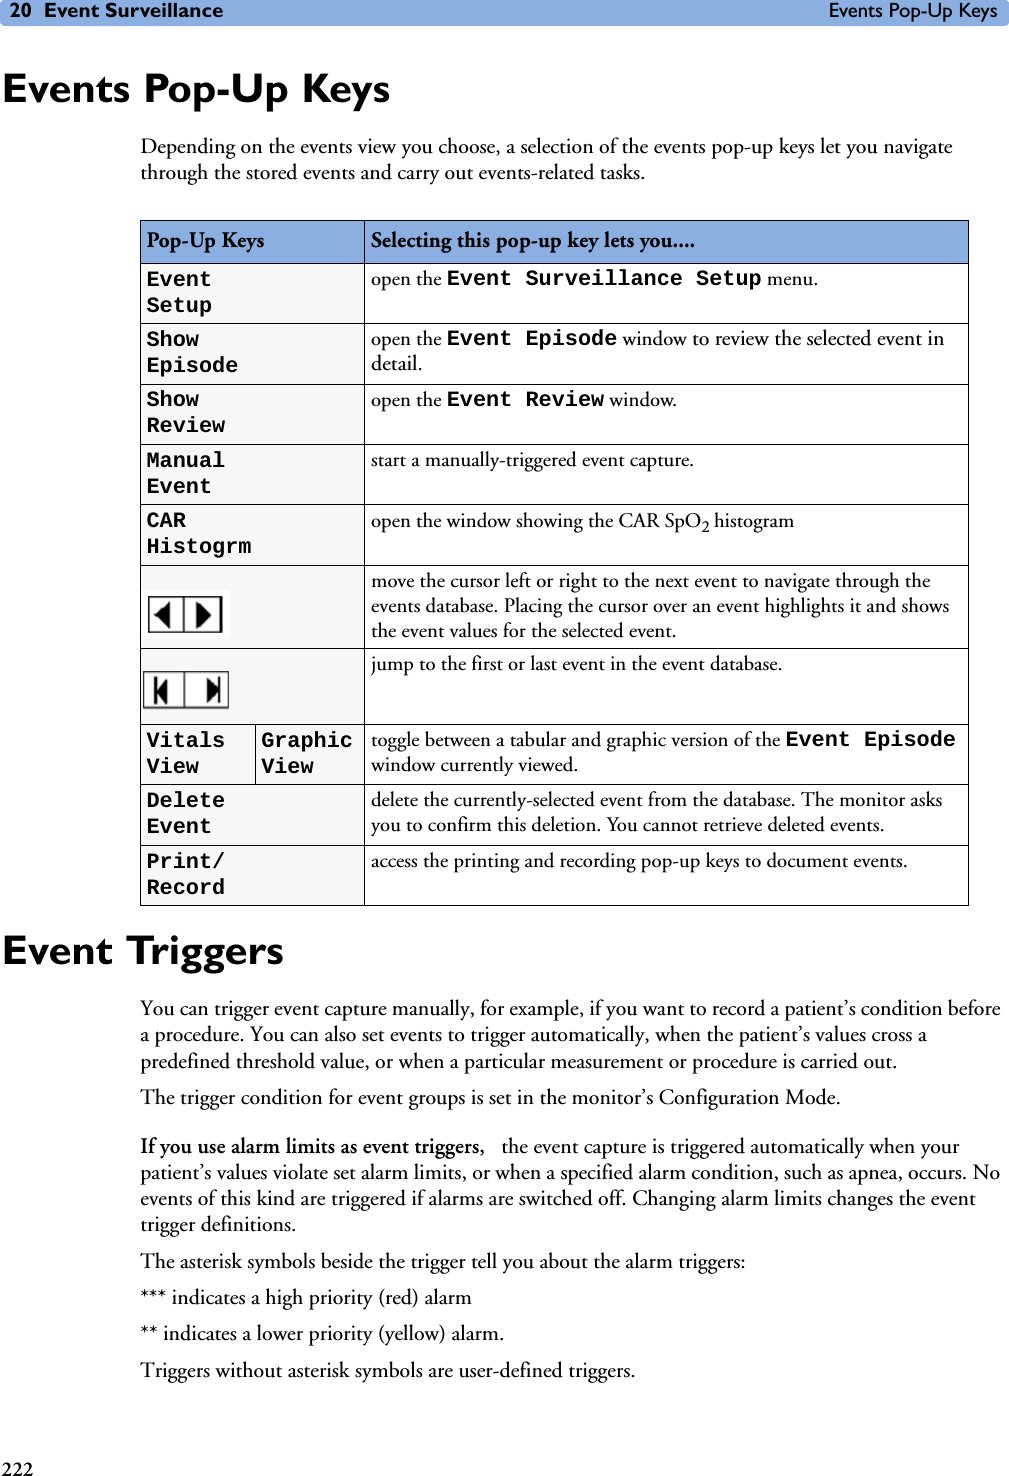 20 Event Surveillance Events Pop-Up Keys222Events Pop-Up KeysDepending on the events view you choose, a selection of the events pop-up keys let you navigate through the stored events and carry out events-related tasks.Event TriggersYou can trigger event capture manually, for example, if you want to record a patient’s condition before a procedure. You can also set events to trigger automatically, when the patient’s values cross a predefined threshold value, or when a particular measurement or procedure is carried out. The trigger condition for event groups is set in the monitor’s Configuration Mode.If you use alarm limits as event triggers,  the event capture is triggered automatically when your patient’s values violate set alarm limits, or when a specified alarm condition, such as apnea, occurs. No events of this kind are triggered if alarms are switched off. Changing alarm limits changes the event trigger definitions.The asterisk symbols beside the trigger tell you about the alarm triggers: *** indicates a high priority (red) alarm** indicates a lower priority (yellow) alarm. Triggers without asterisk symbols are user-defined triggers.Pop-Up Keys Selecting this pop-up key lets you....Event Setupopen the Event Surveillance Setup menu.Show Episodeopen the Event Episode window to review the selected event in detail. Show Reviewopen the Event Review window. ManualEvent start a manually-triggered event capture.CARHistogrmopen the window showing the CAR SpO2 histogrammove the cursor left or right to the next event to navigate through the events database. Placing the cursor over an event highlights it and shows the event values for the selected event.jump to the first or last event in the event database.Vitals ViewGraphic Viewtoggle between a tabular and graphic version of the Event Episode window currently viewed.Delete Eventdelete the currently-selected event from the database. The monitor asks you to confirm this deletion. You cannot retrieve deleted events.Print/Recordaccess the printing and recording pop-up keys to document events.